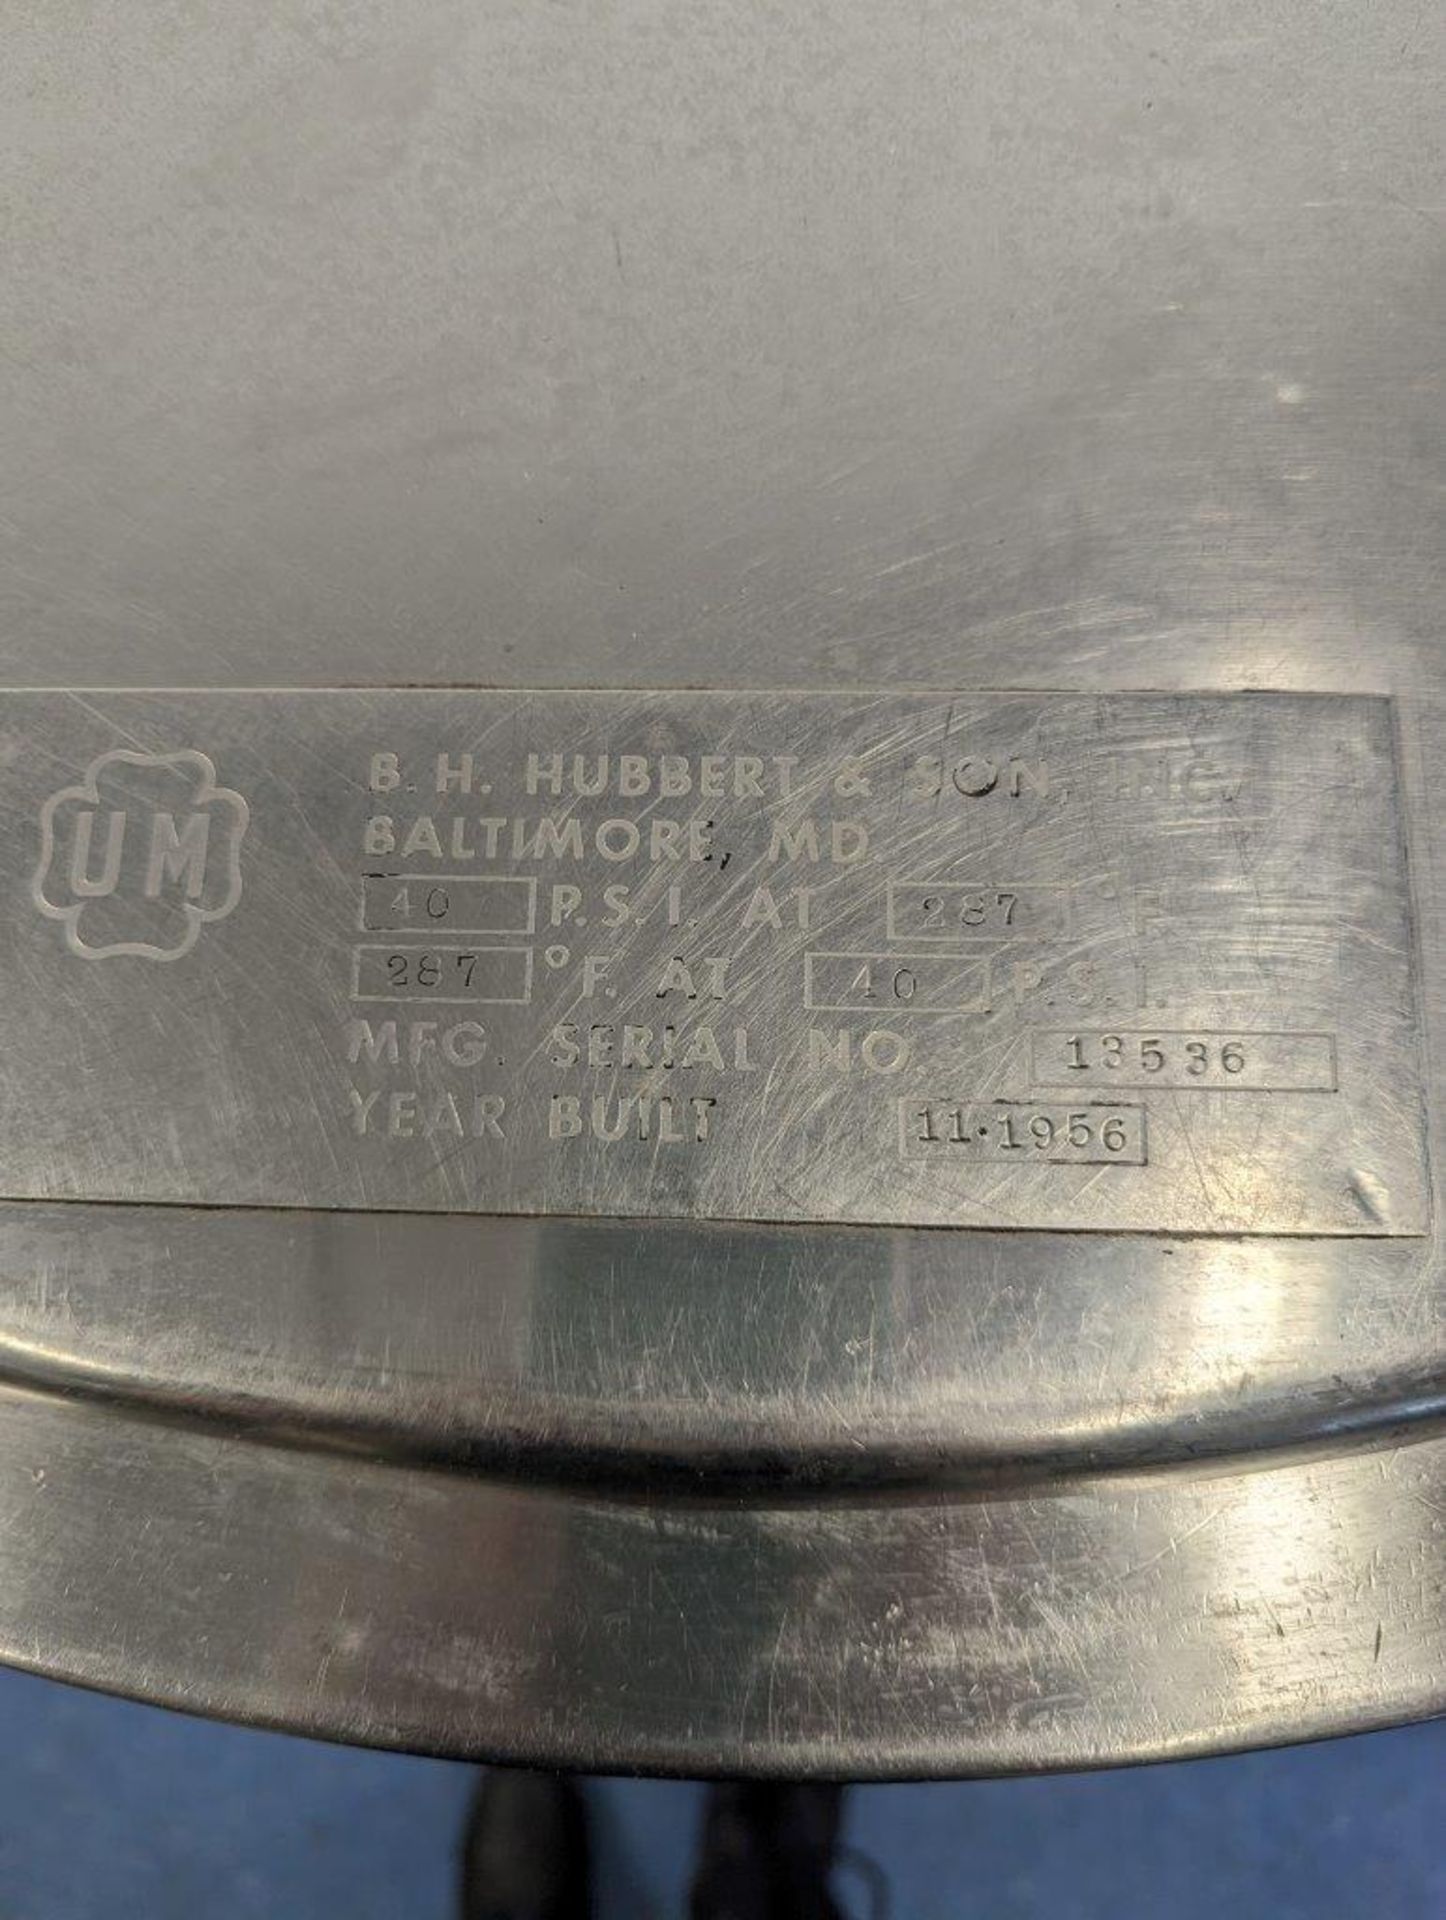 BH HUBERT SONS 40 GAL JACKETED KETTLE - Image 8 of 11